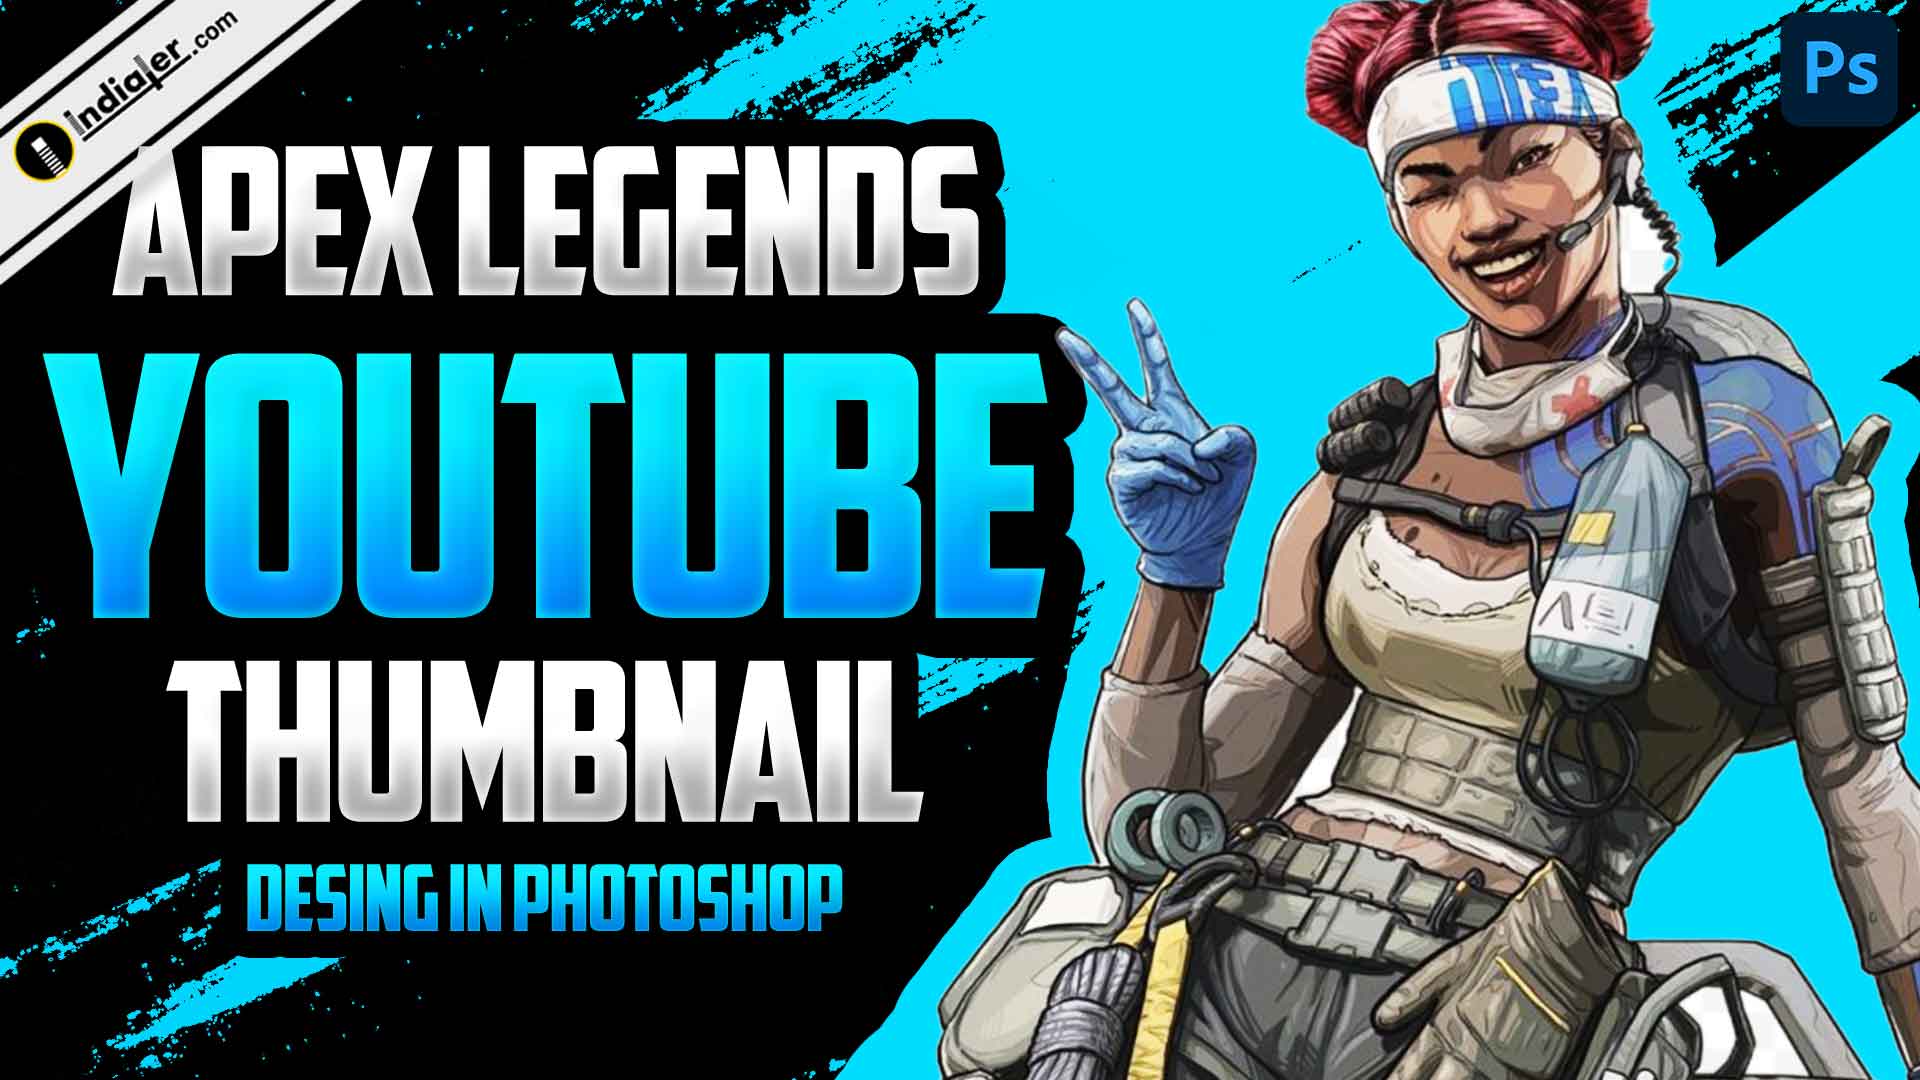 Gaming Channel  Thumbnail PSD